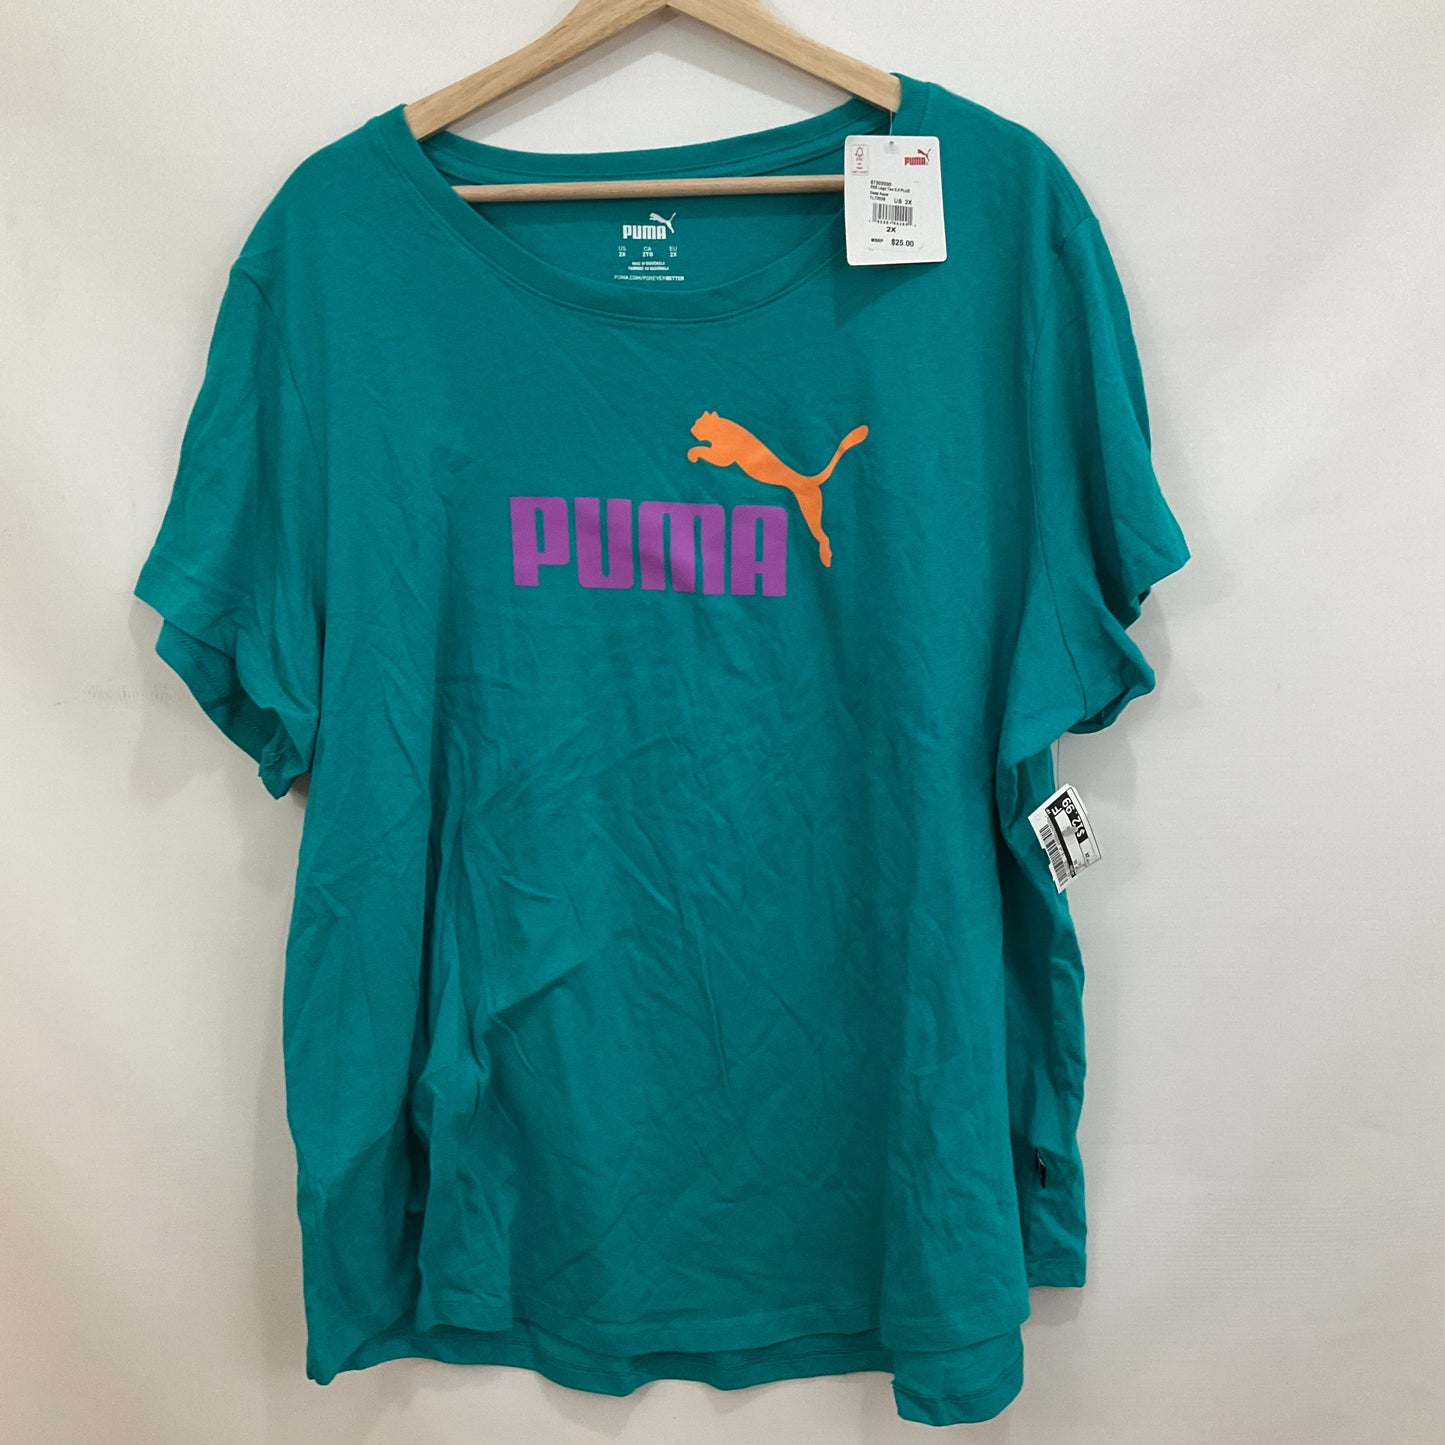 Teal Athletic Top Short Sleeve Puma, Size 2x